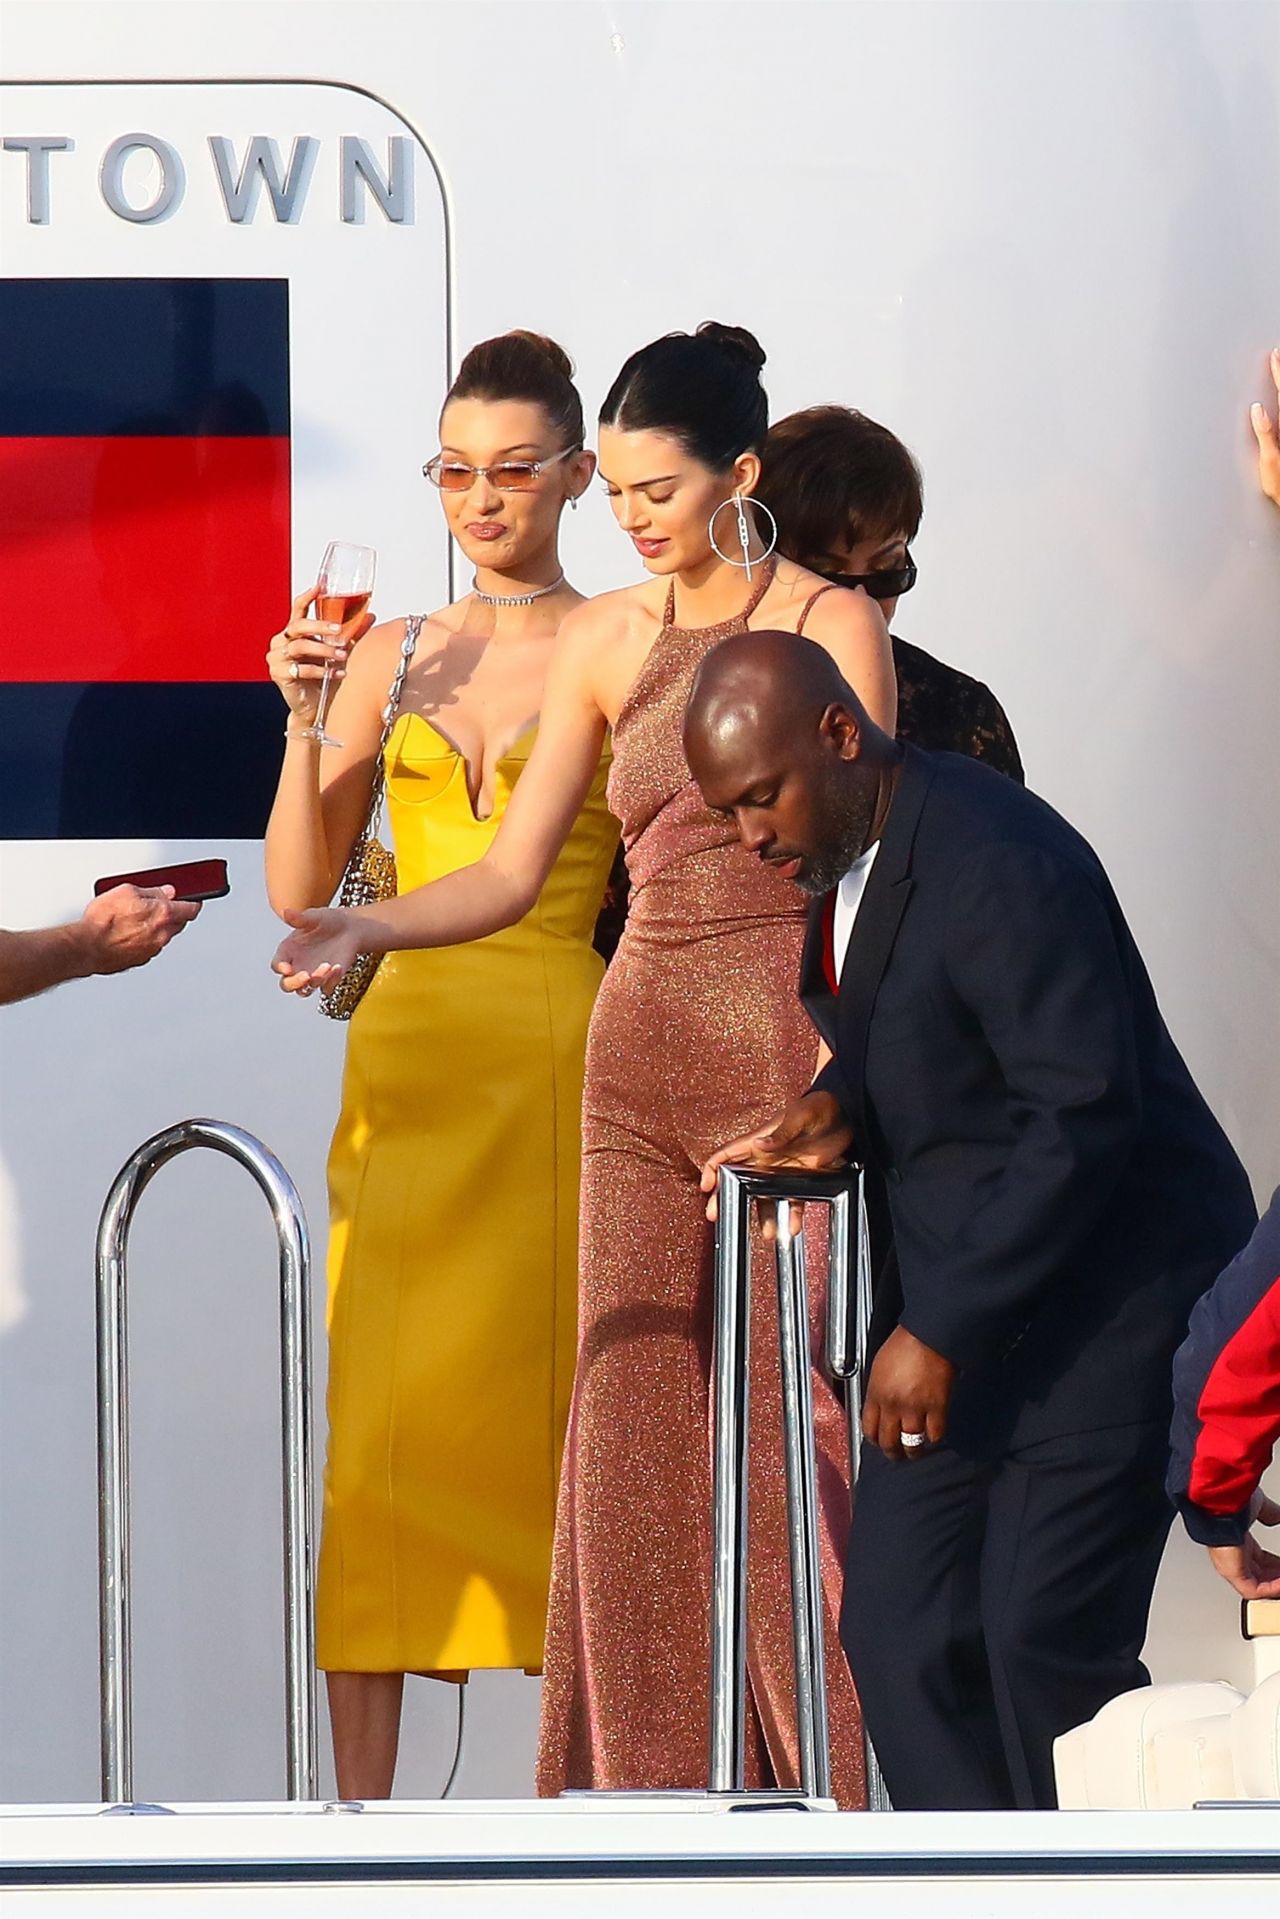 bella-hadid-and-kendall-jenner-tommy-hilfigers-yacht-in-monaco-05-25-2019-3.jpg